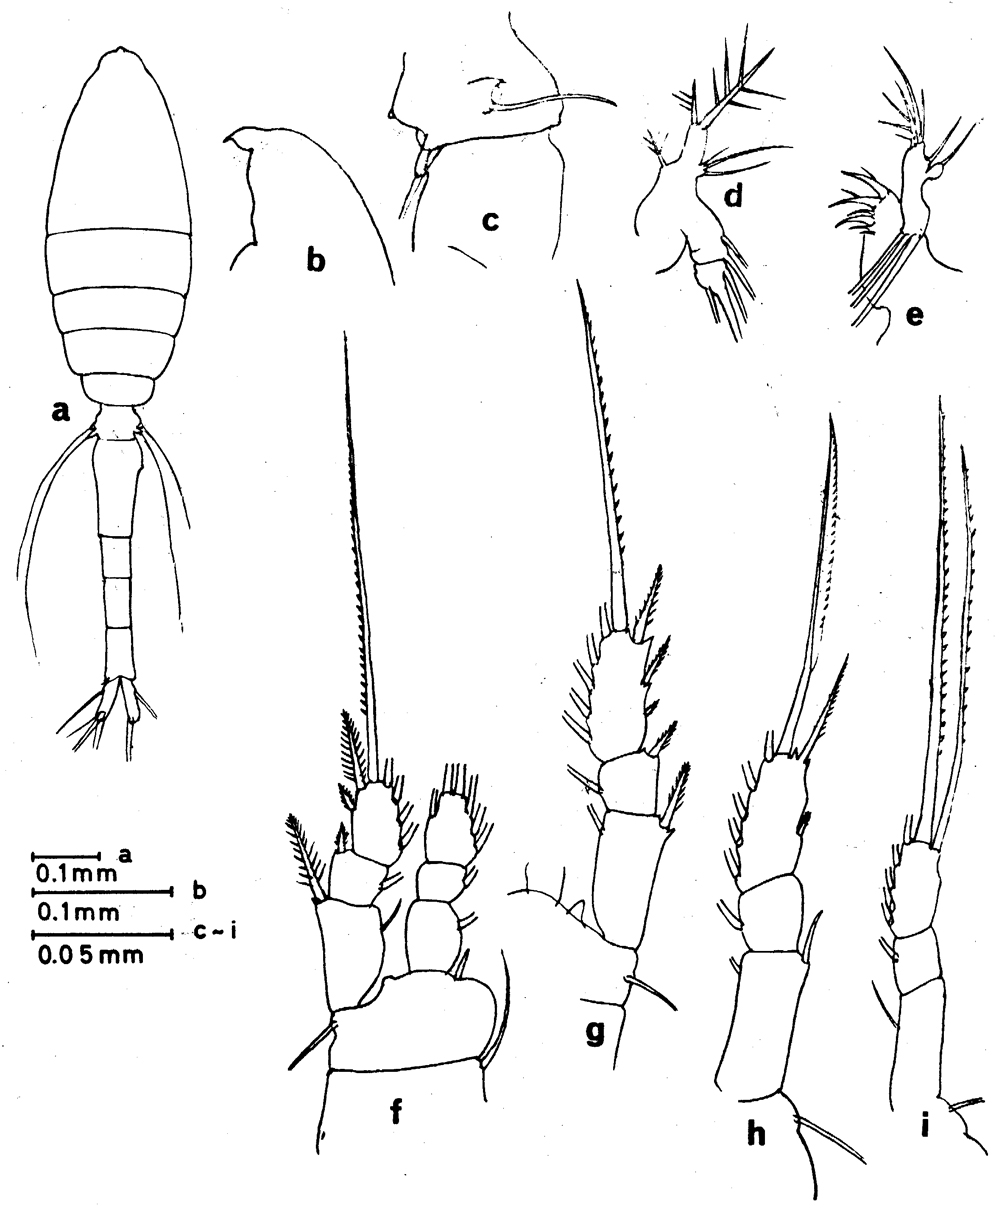 Species Oithona rostralis - Plate 1 of morphological figures